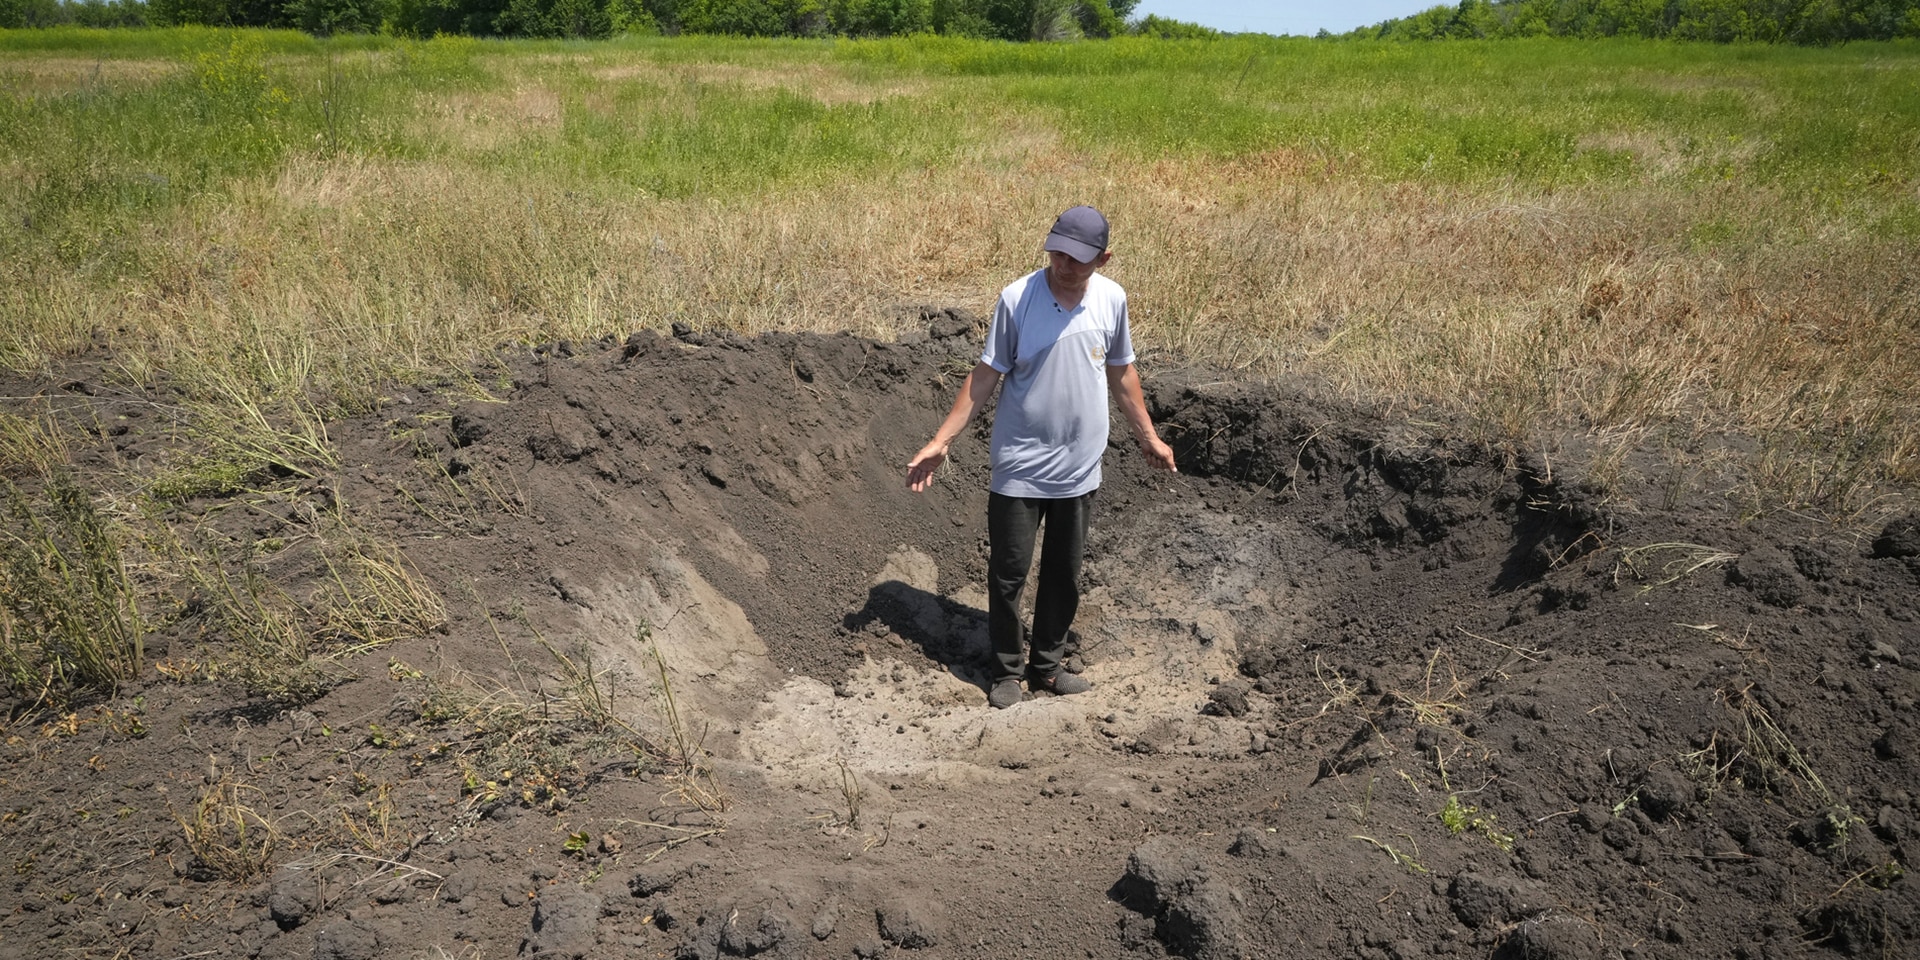 A Ukrainian farmer shows the crater left by a Russian shell in his field.